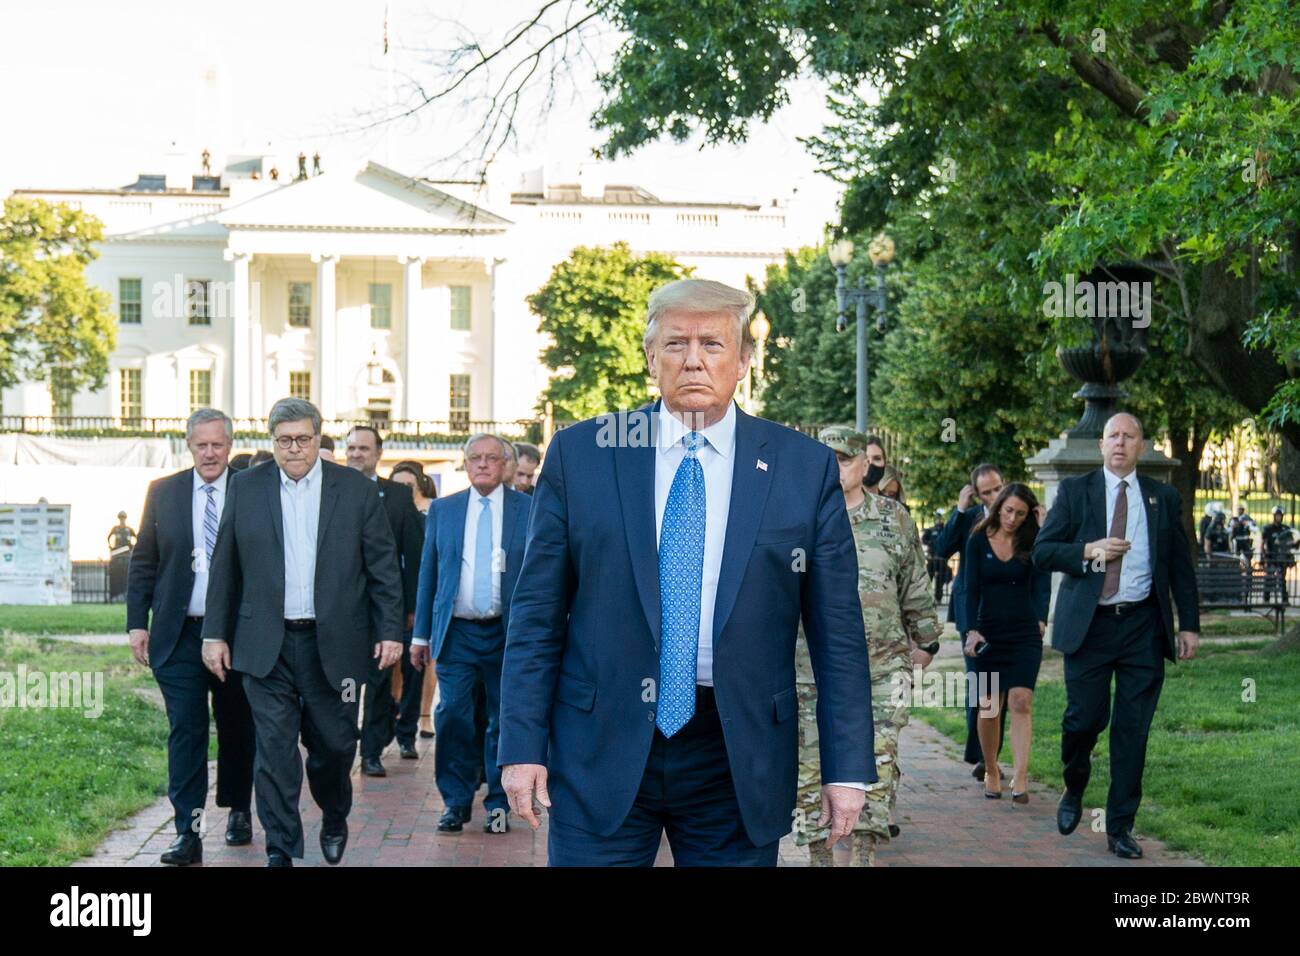 Washington, United States Of America. 01st June, 2020. Washington, United States of America. 01 June, 2020. U.S. President Donald Trump walks across Lafayette Square to St Johns Episcopal Church, damaged in riots following the killing of an unarmed black man in Minneapolis June 1, 2020 in Washington, DC Trump had the area cleared by police using tear gas on peaceful protesters for the photo op. Credit: Shealah Craighead/White House Photo/Alamy Live News Stock Photo